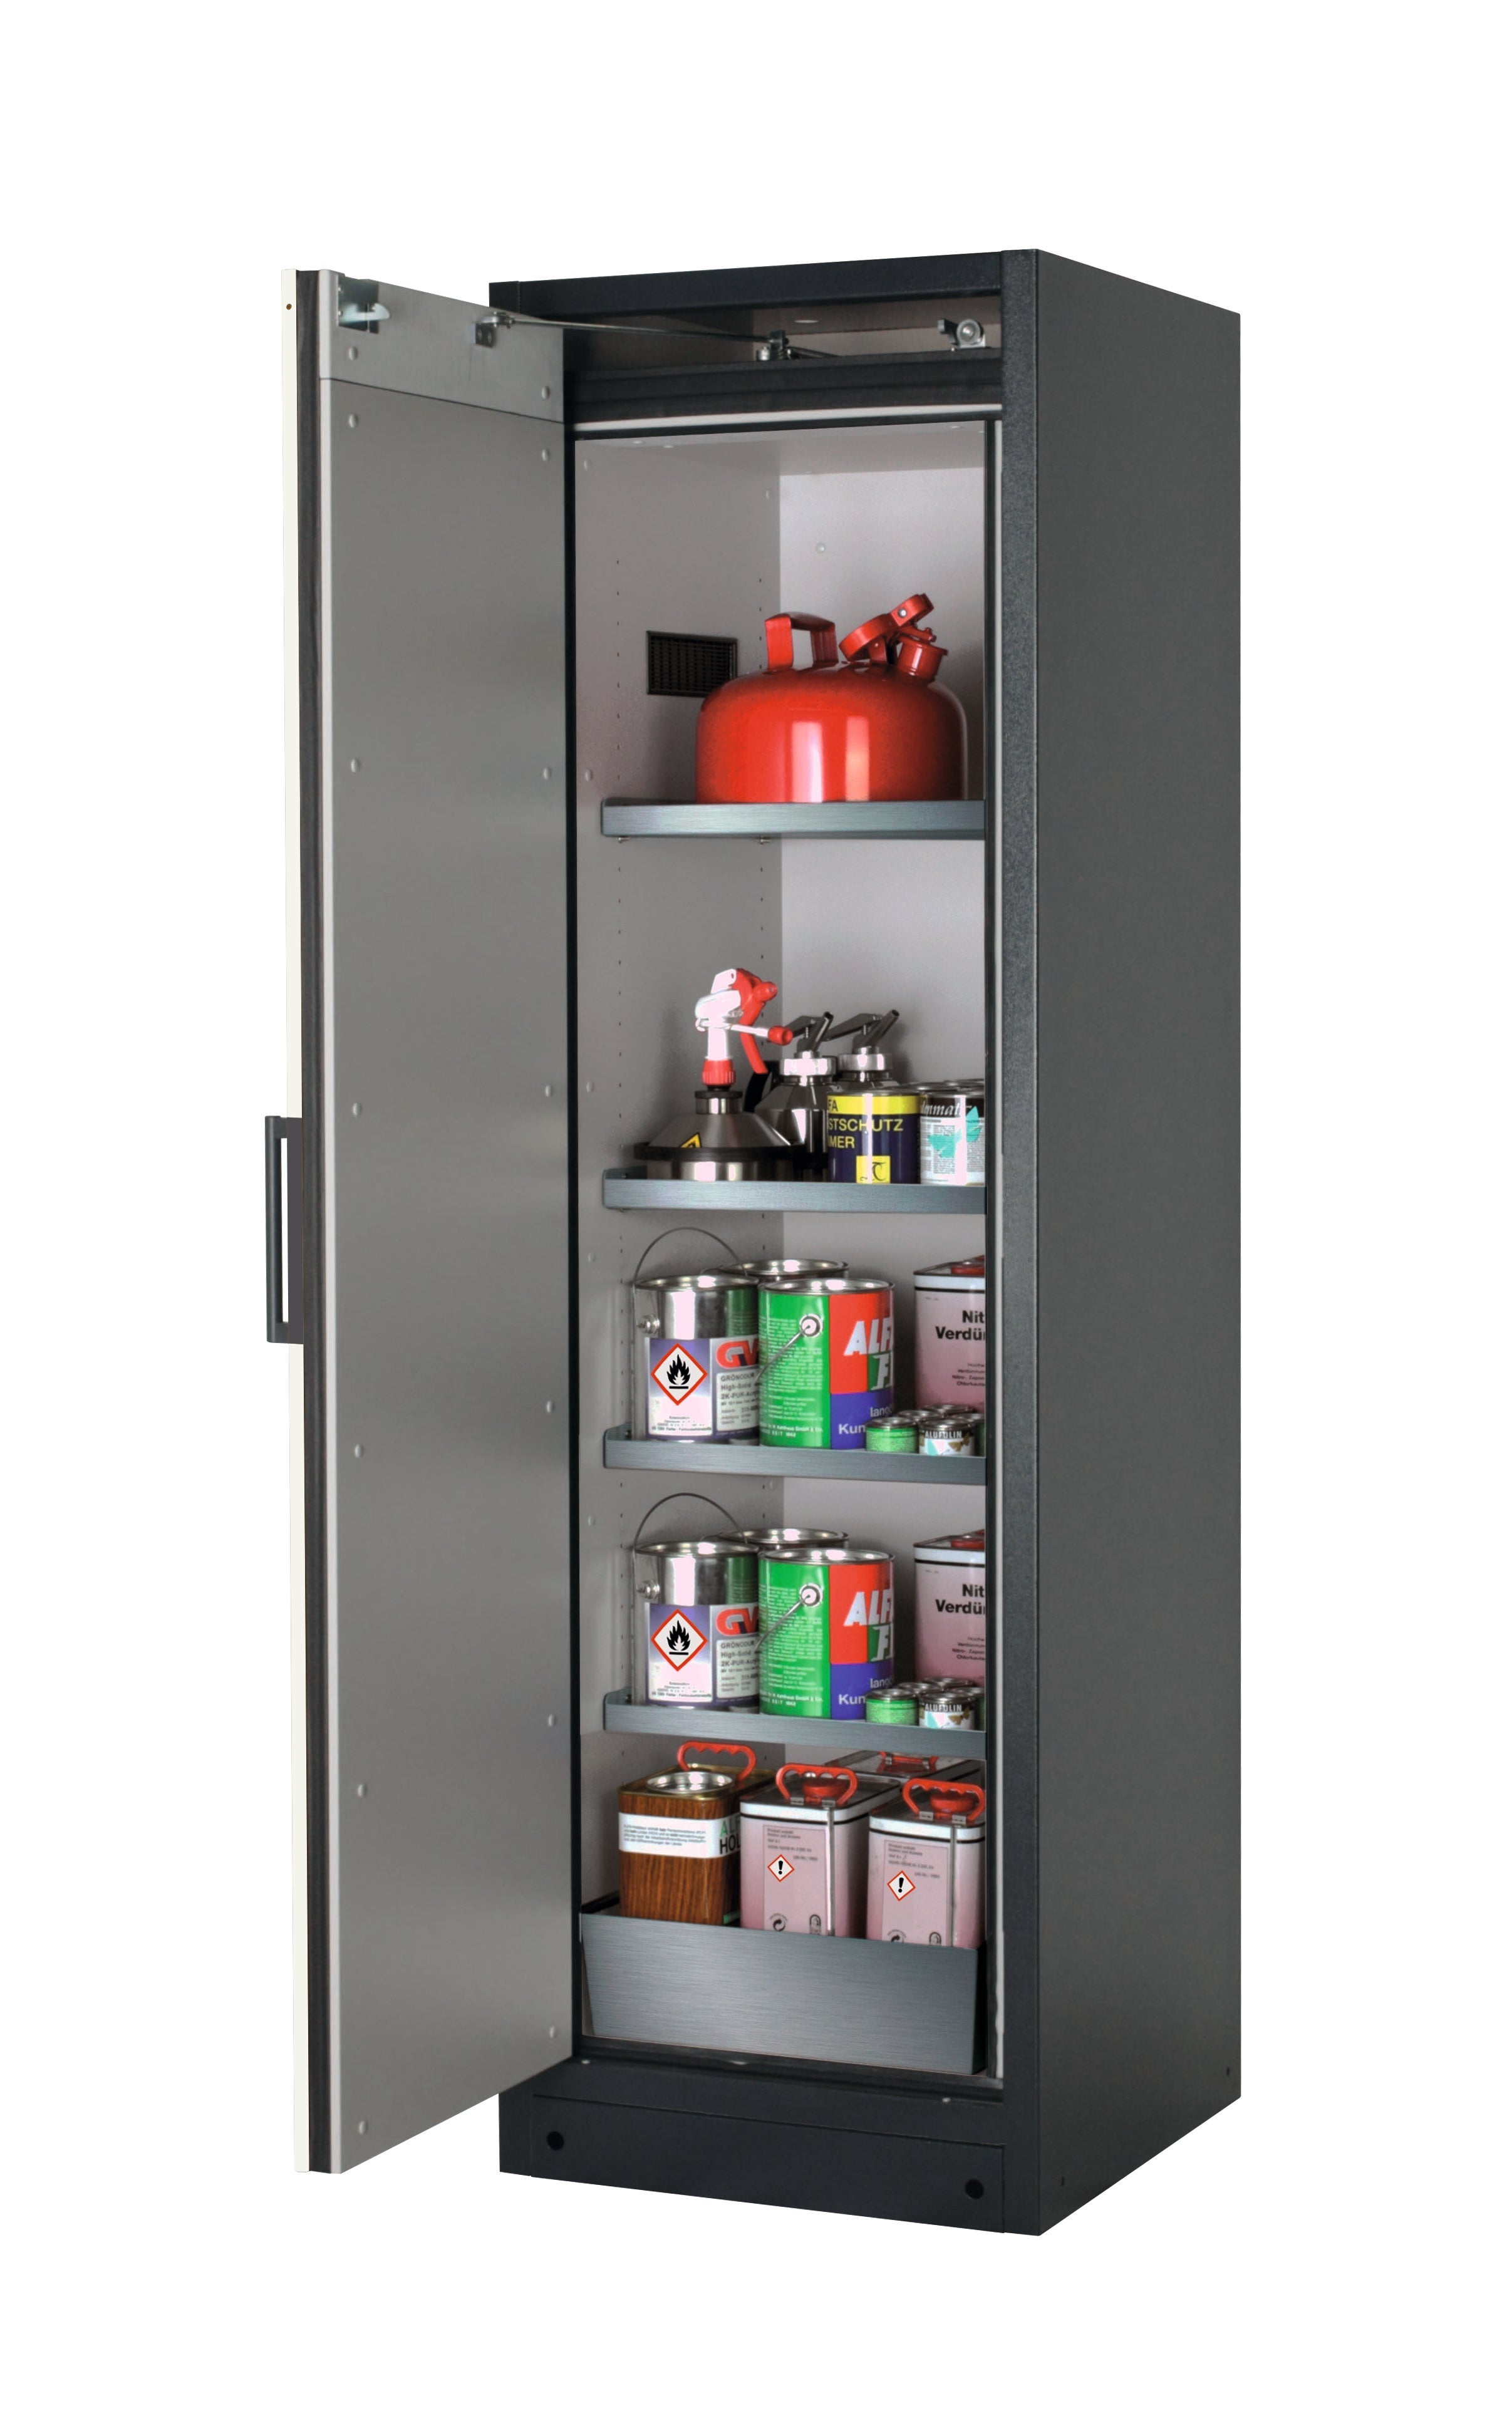 Type 90 safety storage cabinet Q-PEGASUS-90 model Q90.195.060.WDAC in asecos silver with 4x shelf standard (stainless steel 1.4301),